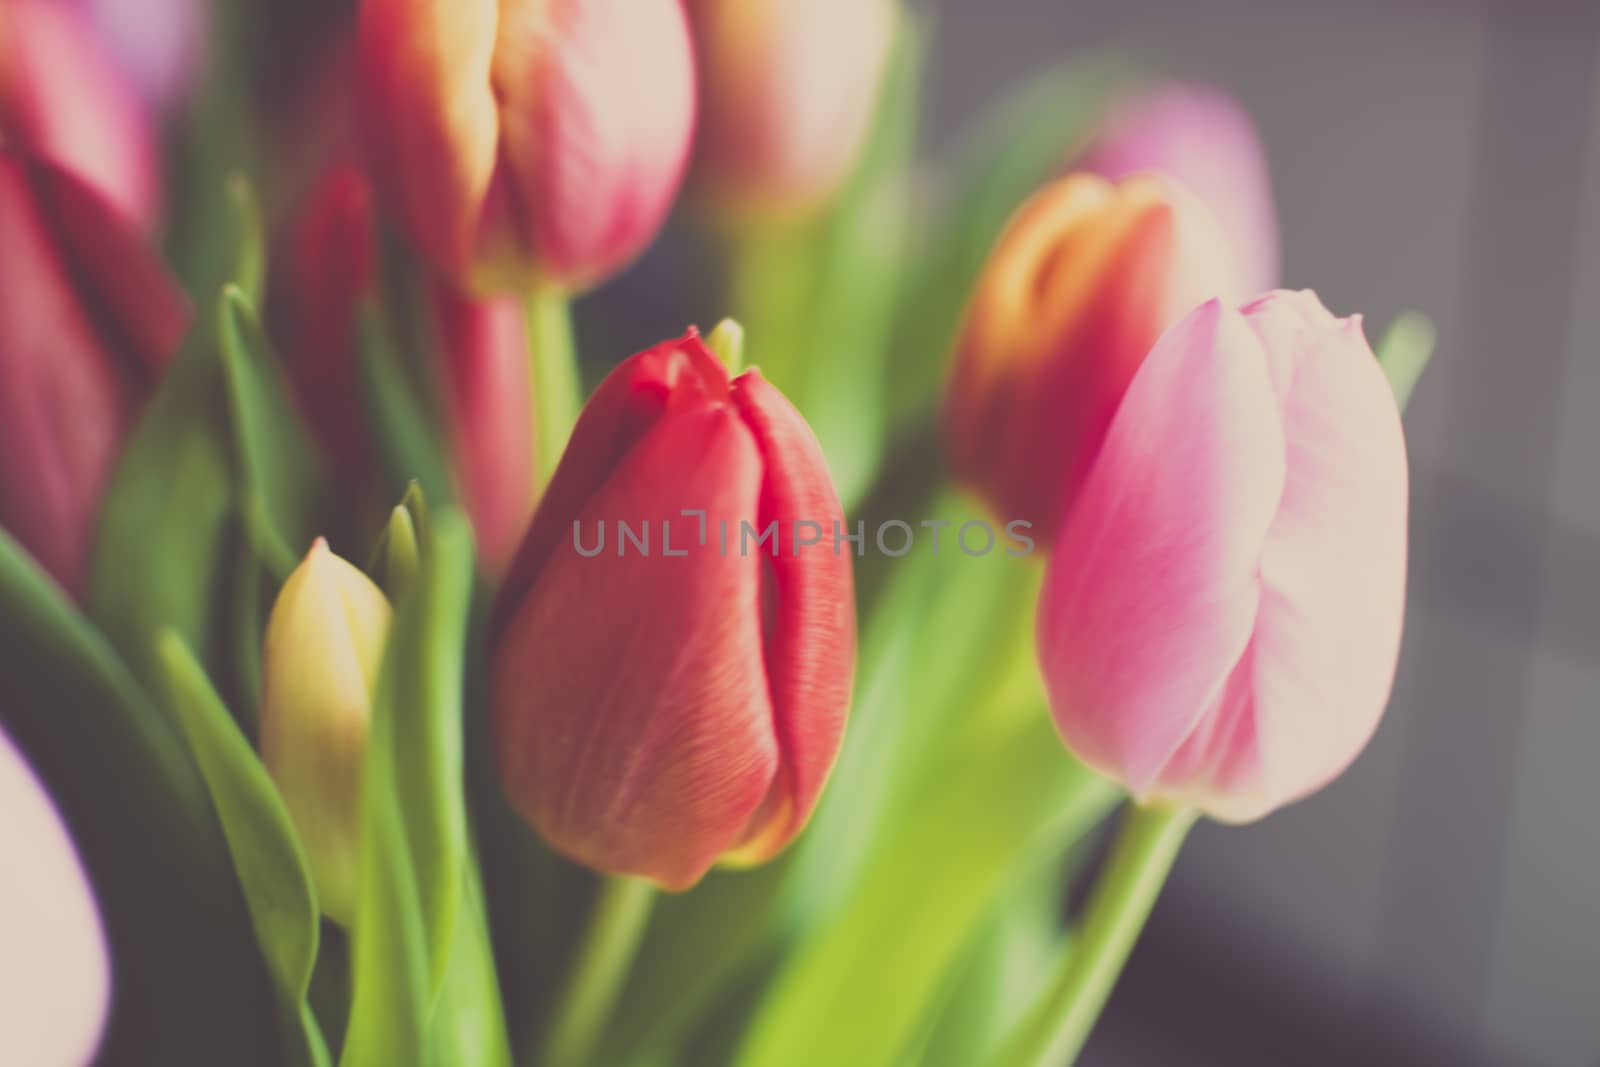 Pink and red tulips with vintage feel.